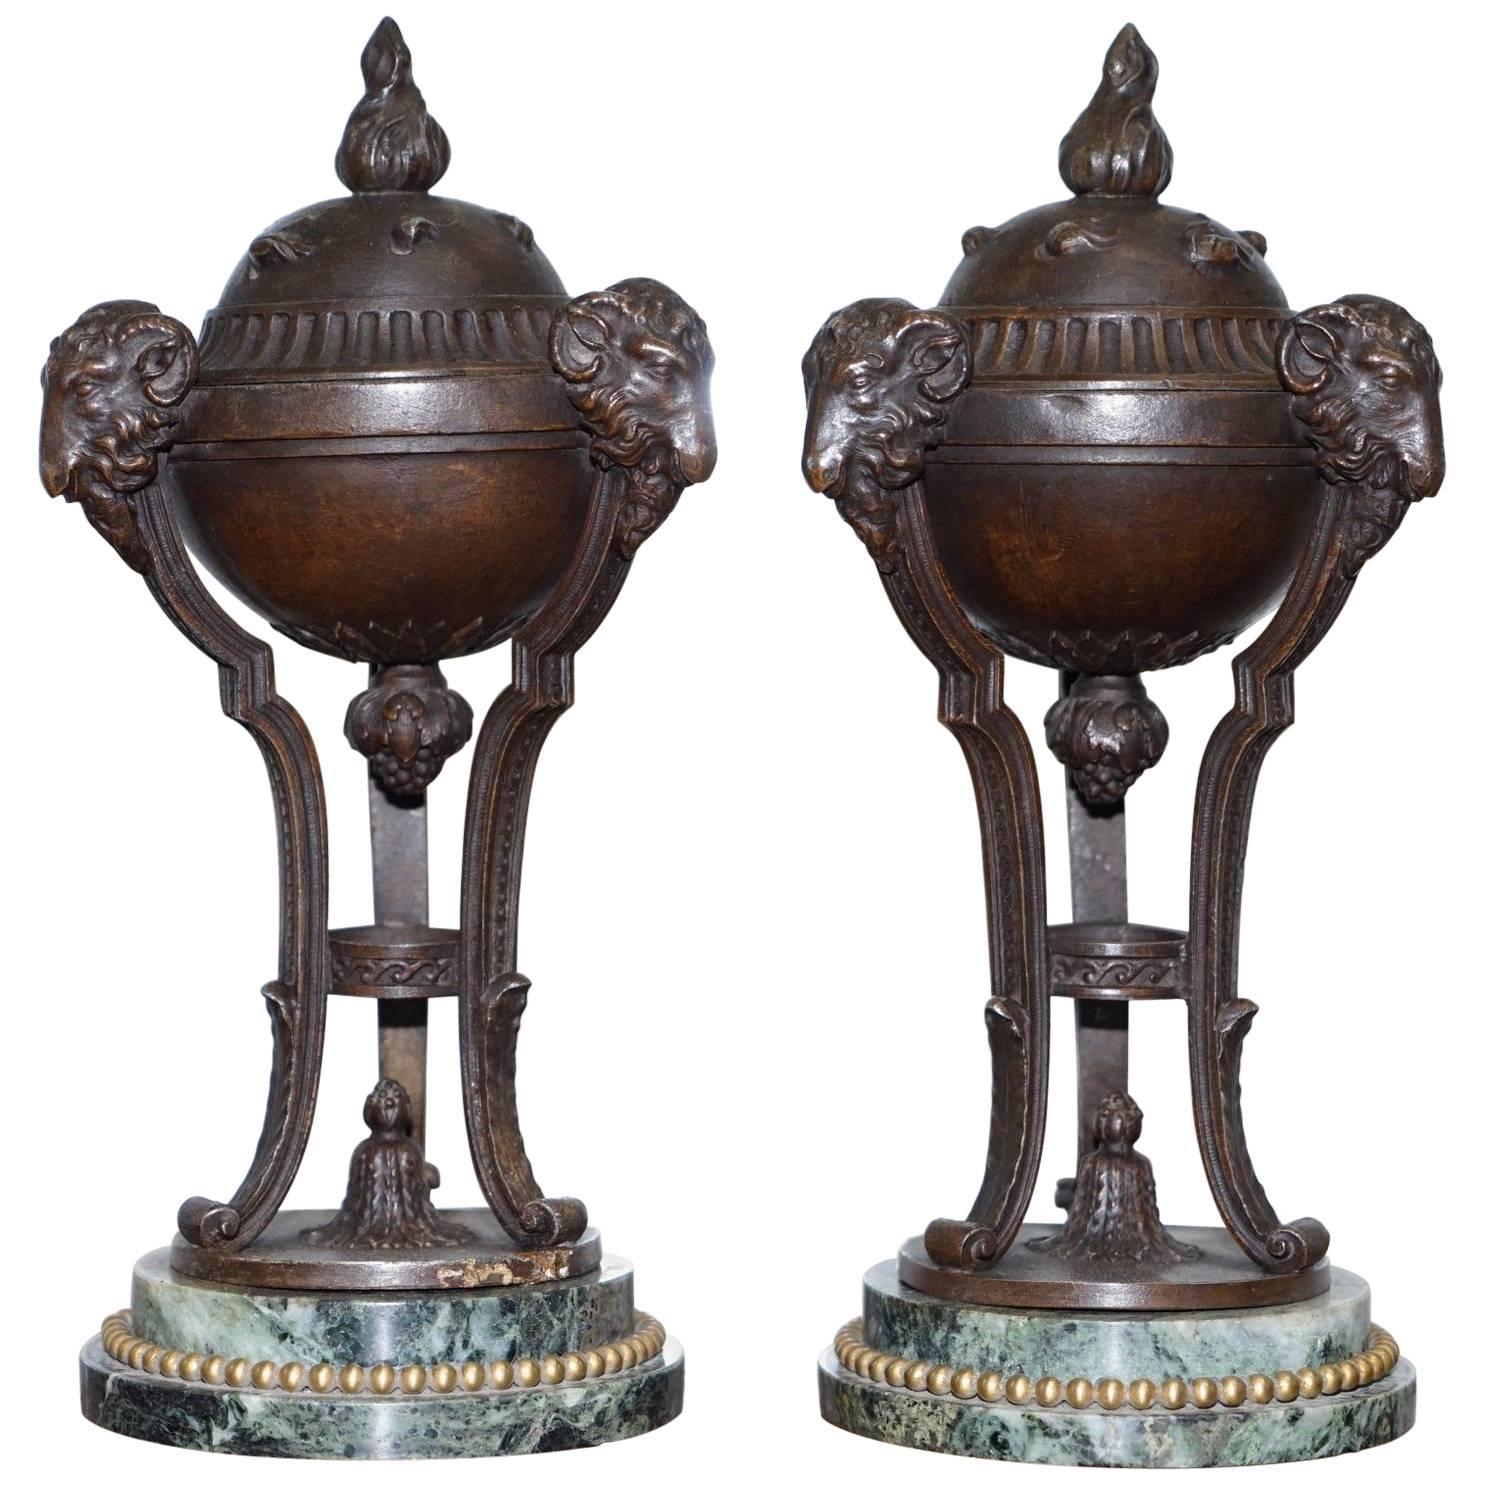 Stunning Pair of Rare Antique Rams Head Bronze Urns with Marble Bases Grand Tour